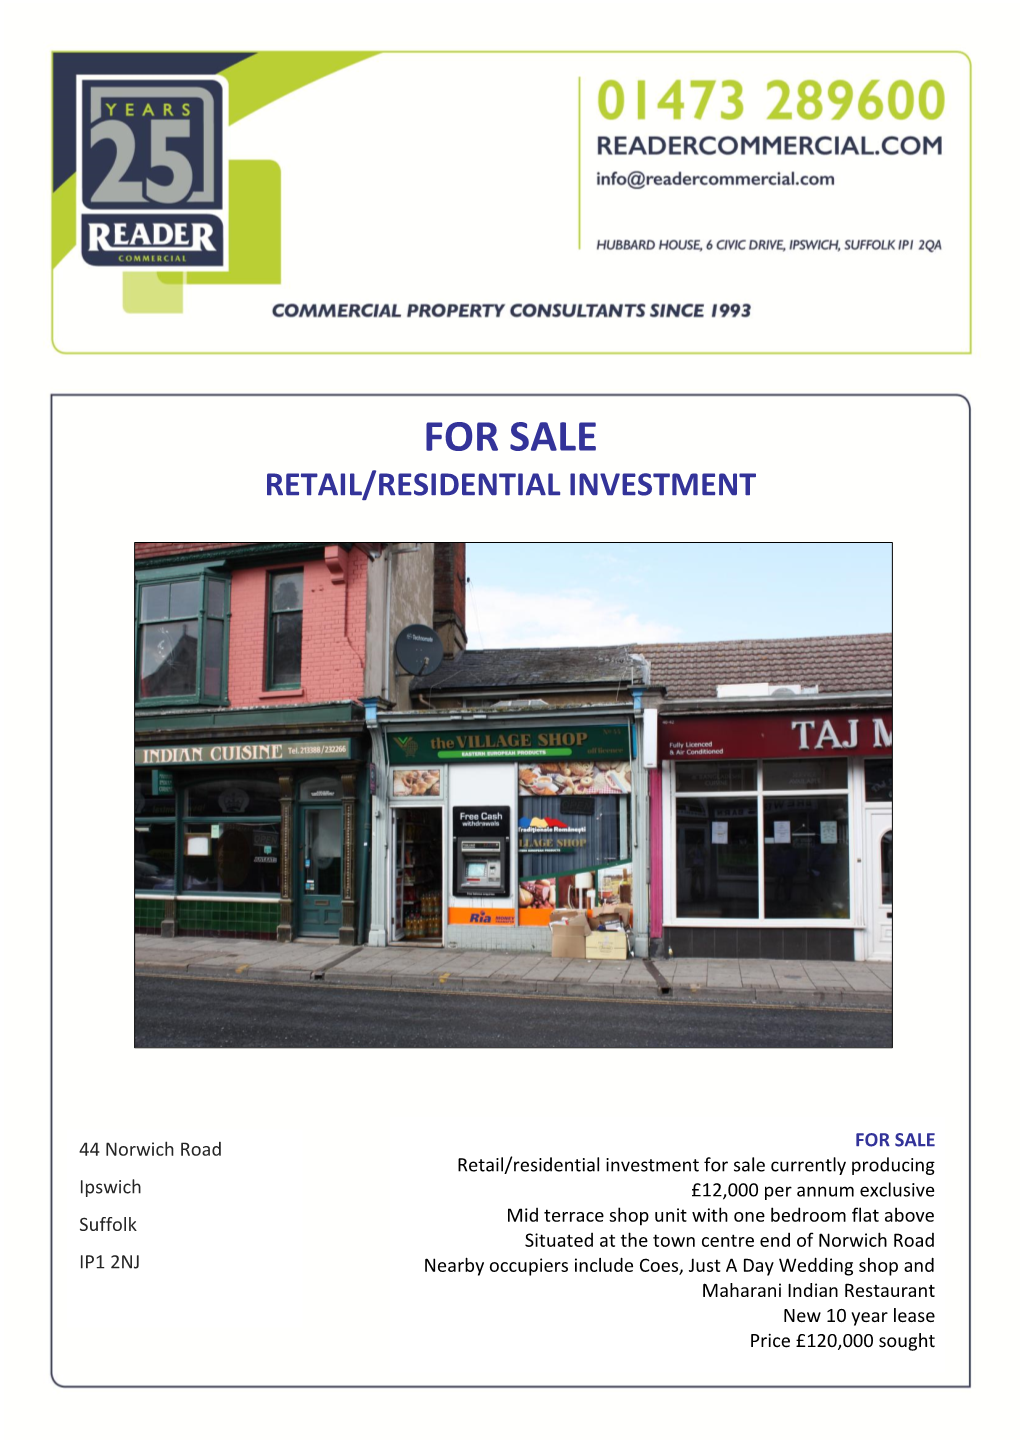 For Sale Retail/Residential Investment